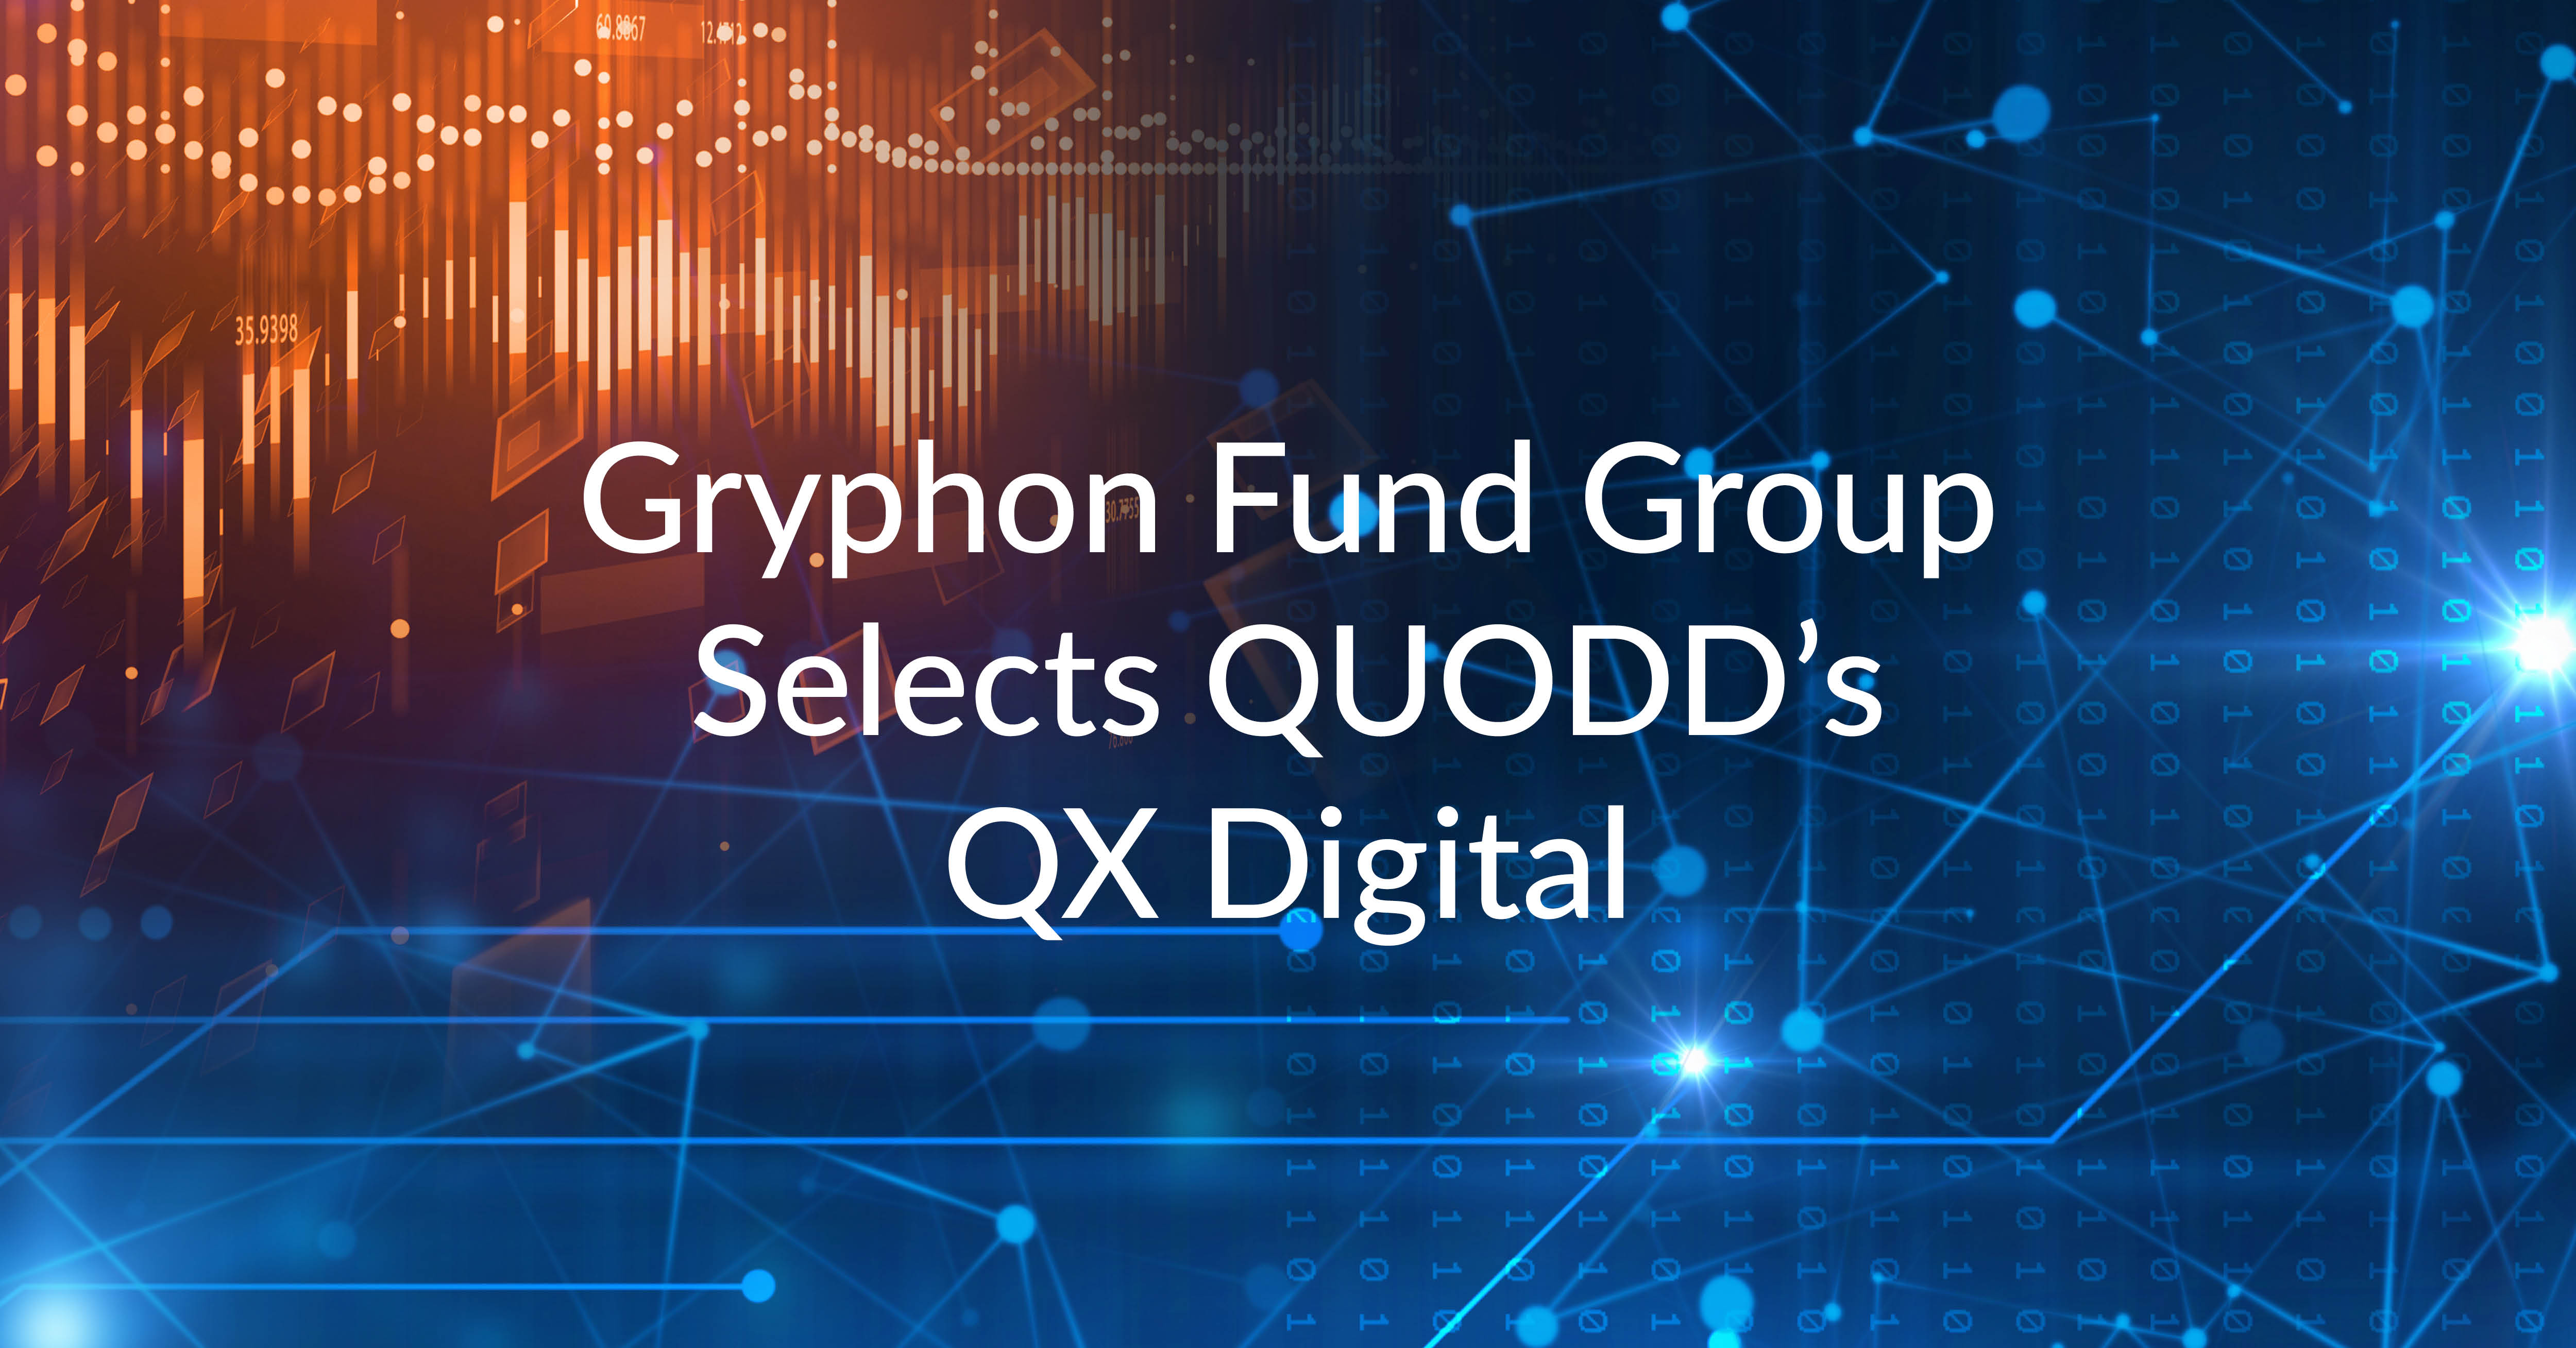 Gryphon Fund Group Selects QUODD’s QX Digital Market Data Platform in Order to Deliver More Services at Scale to Their Asset Servicing Clients